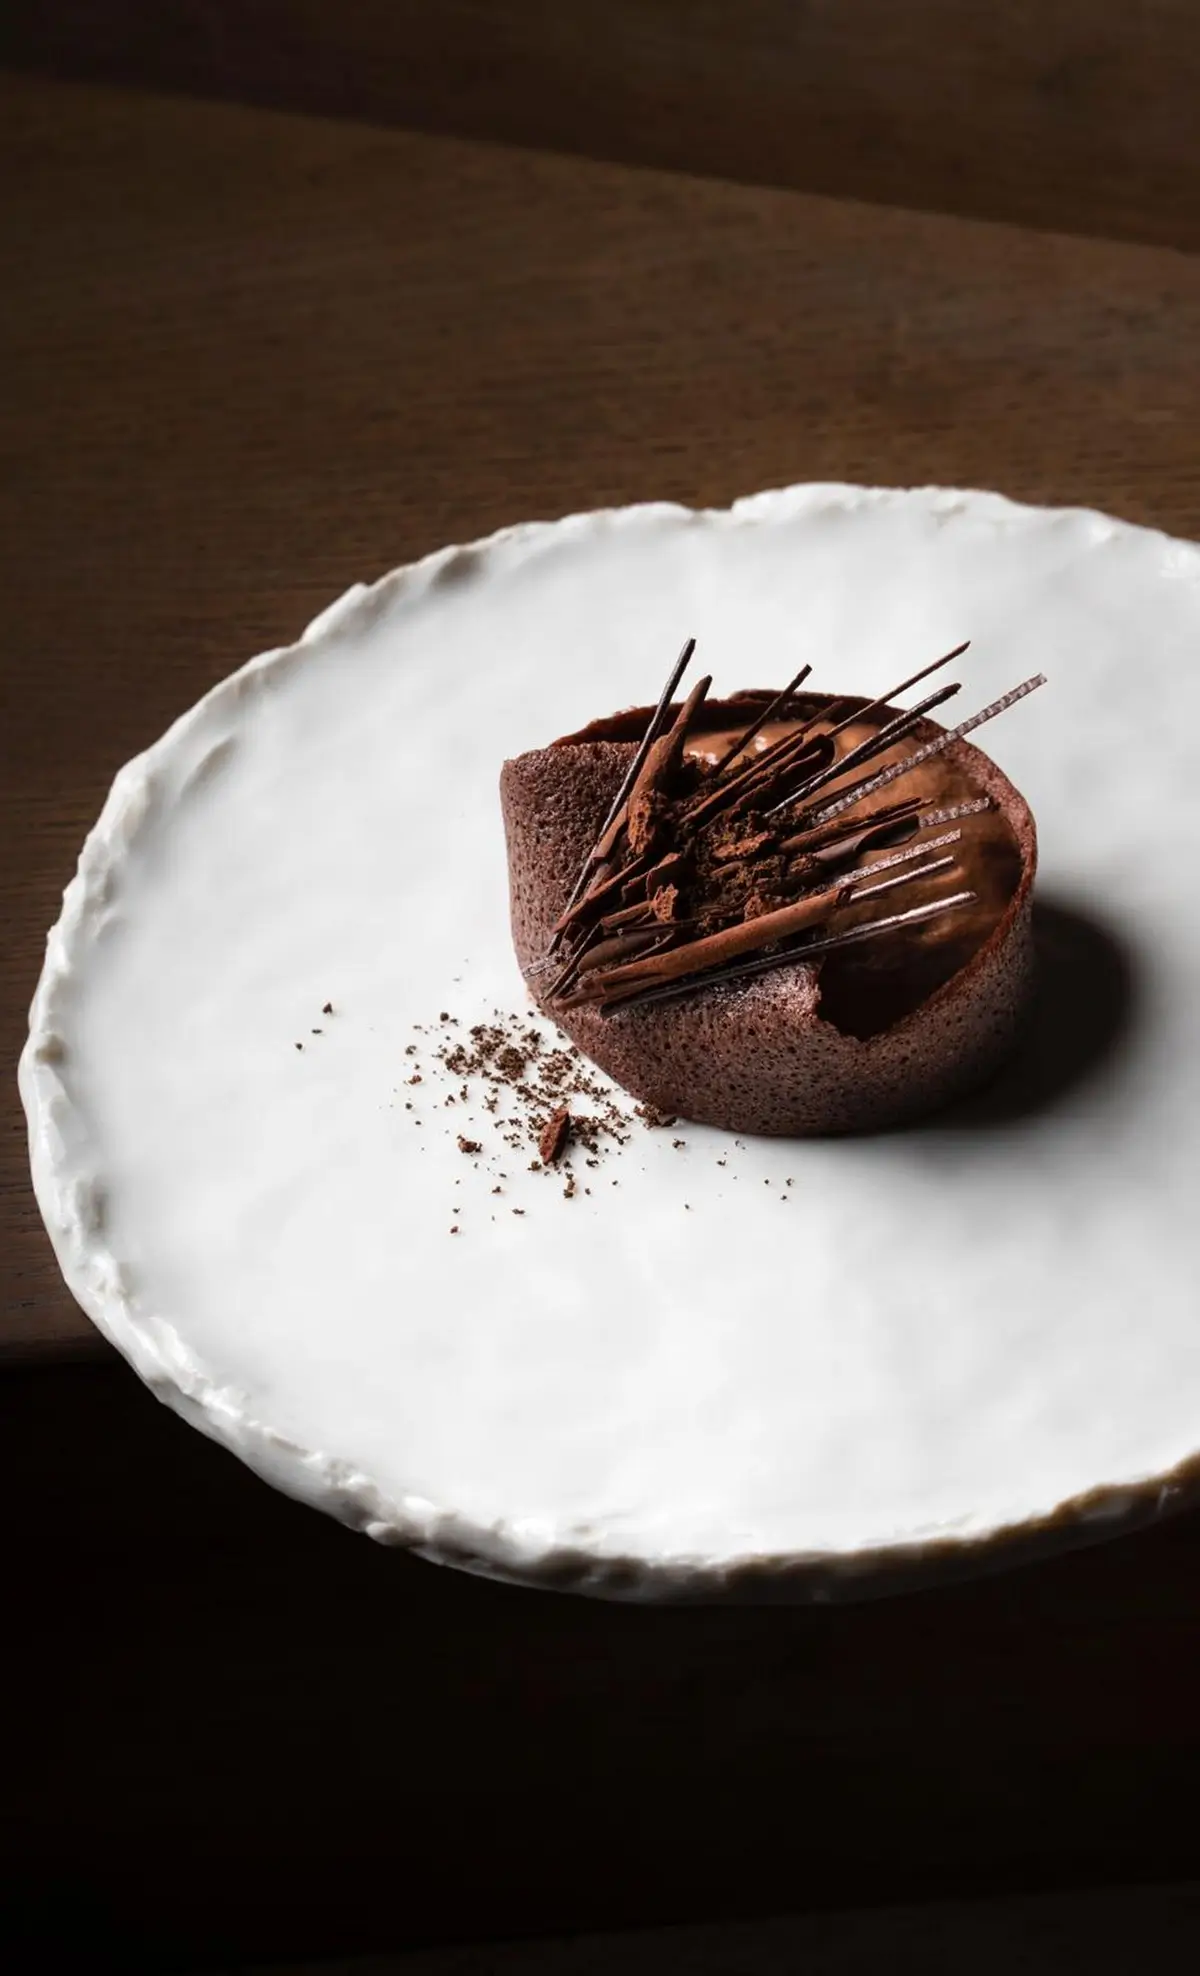 A chocolate dessert at Granite, featuring a delicate presentation on a white plate